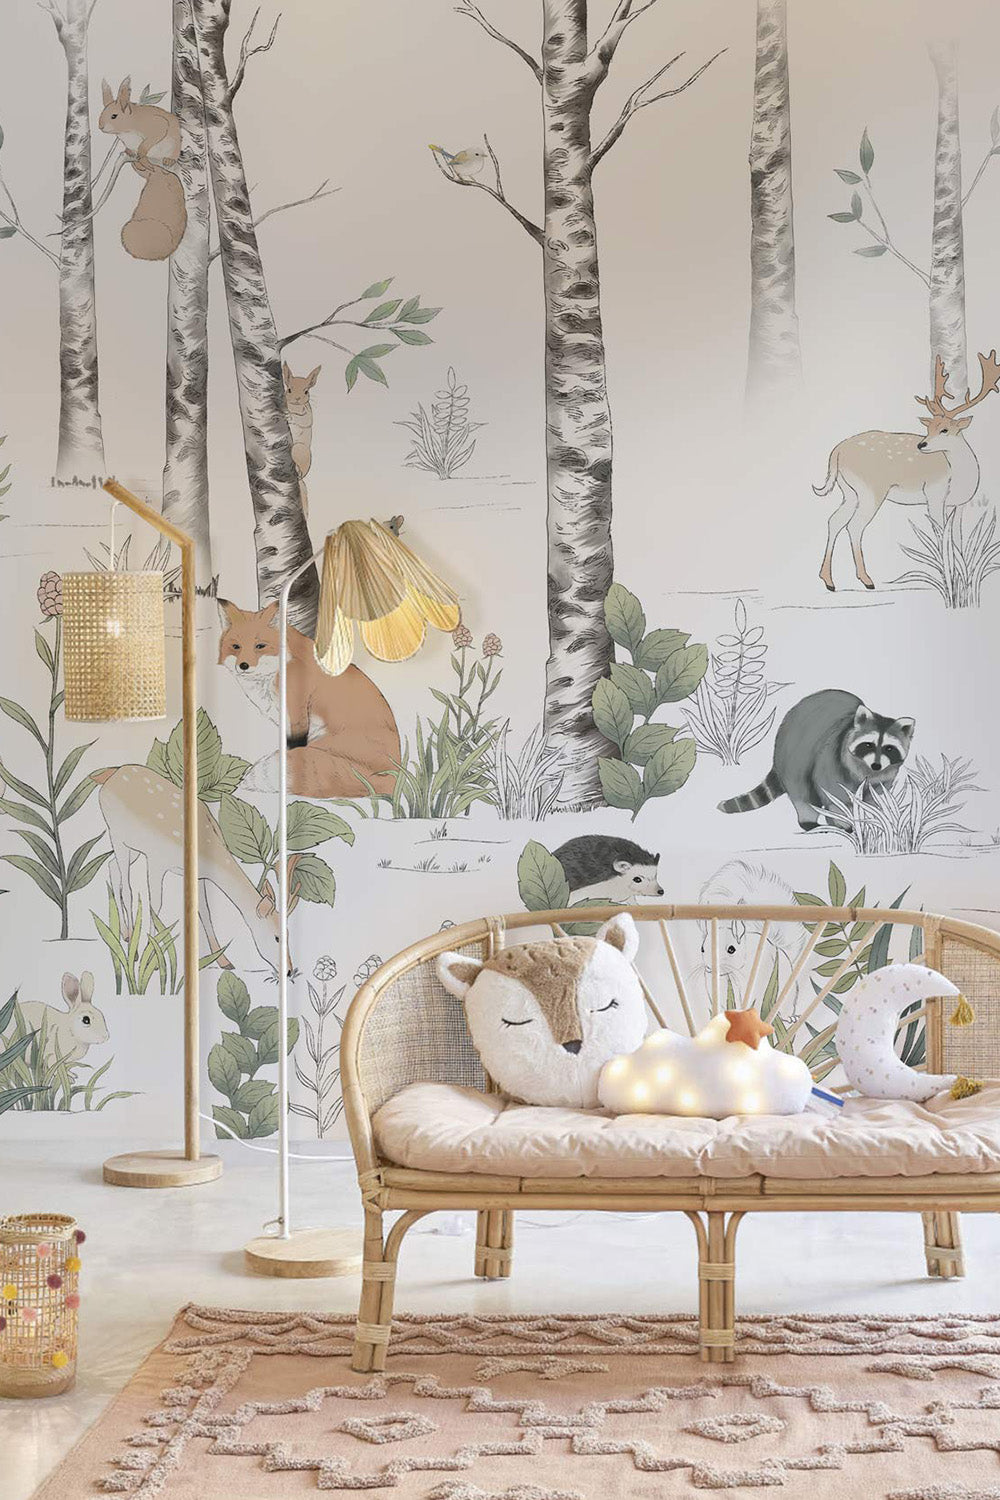 Sticker mural - Funny forest animals set